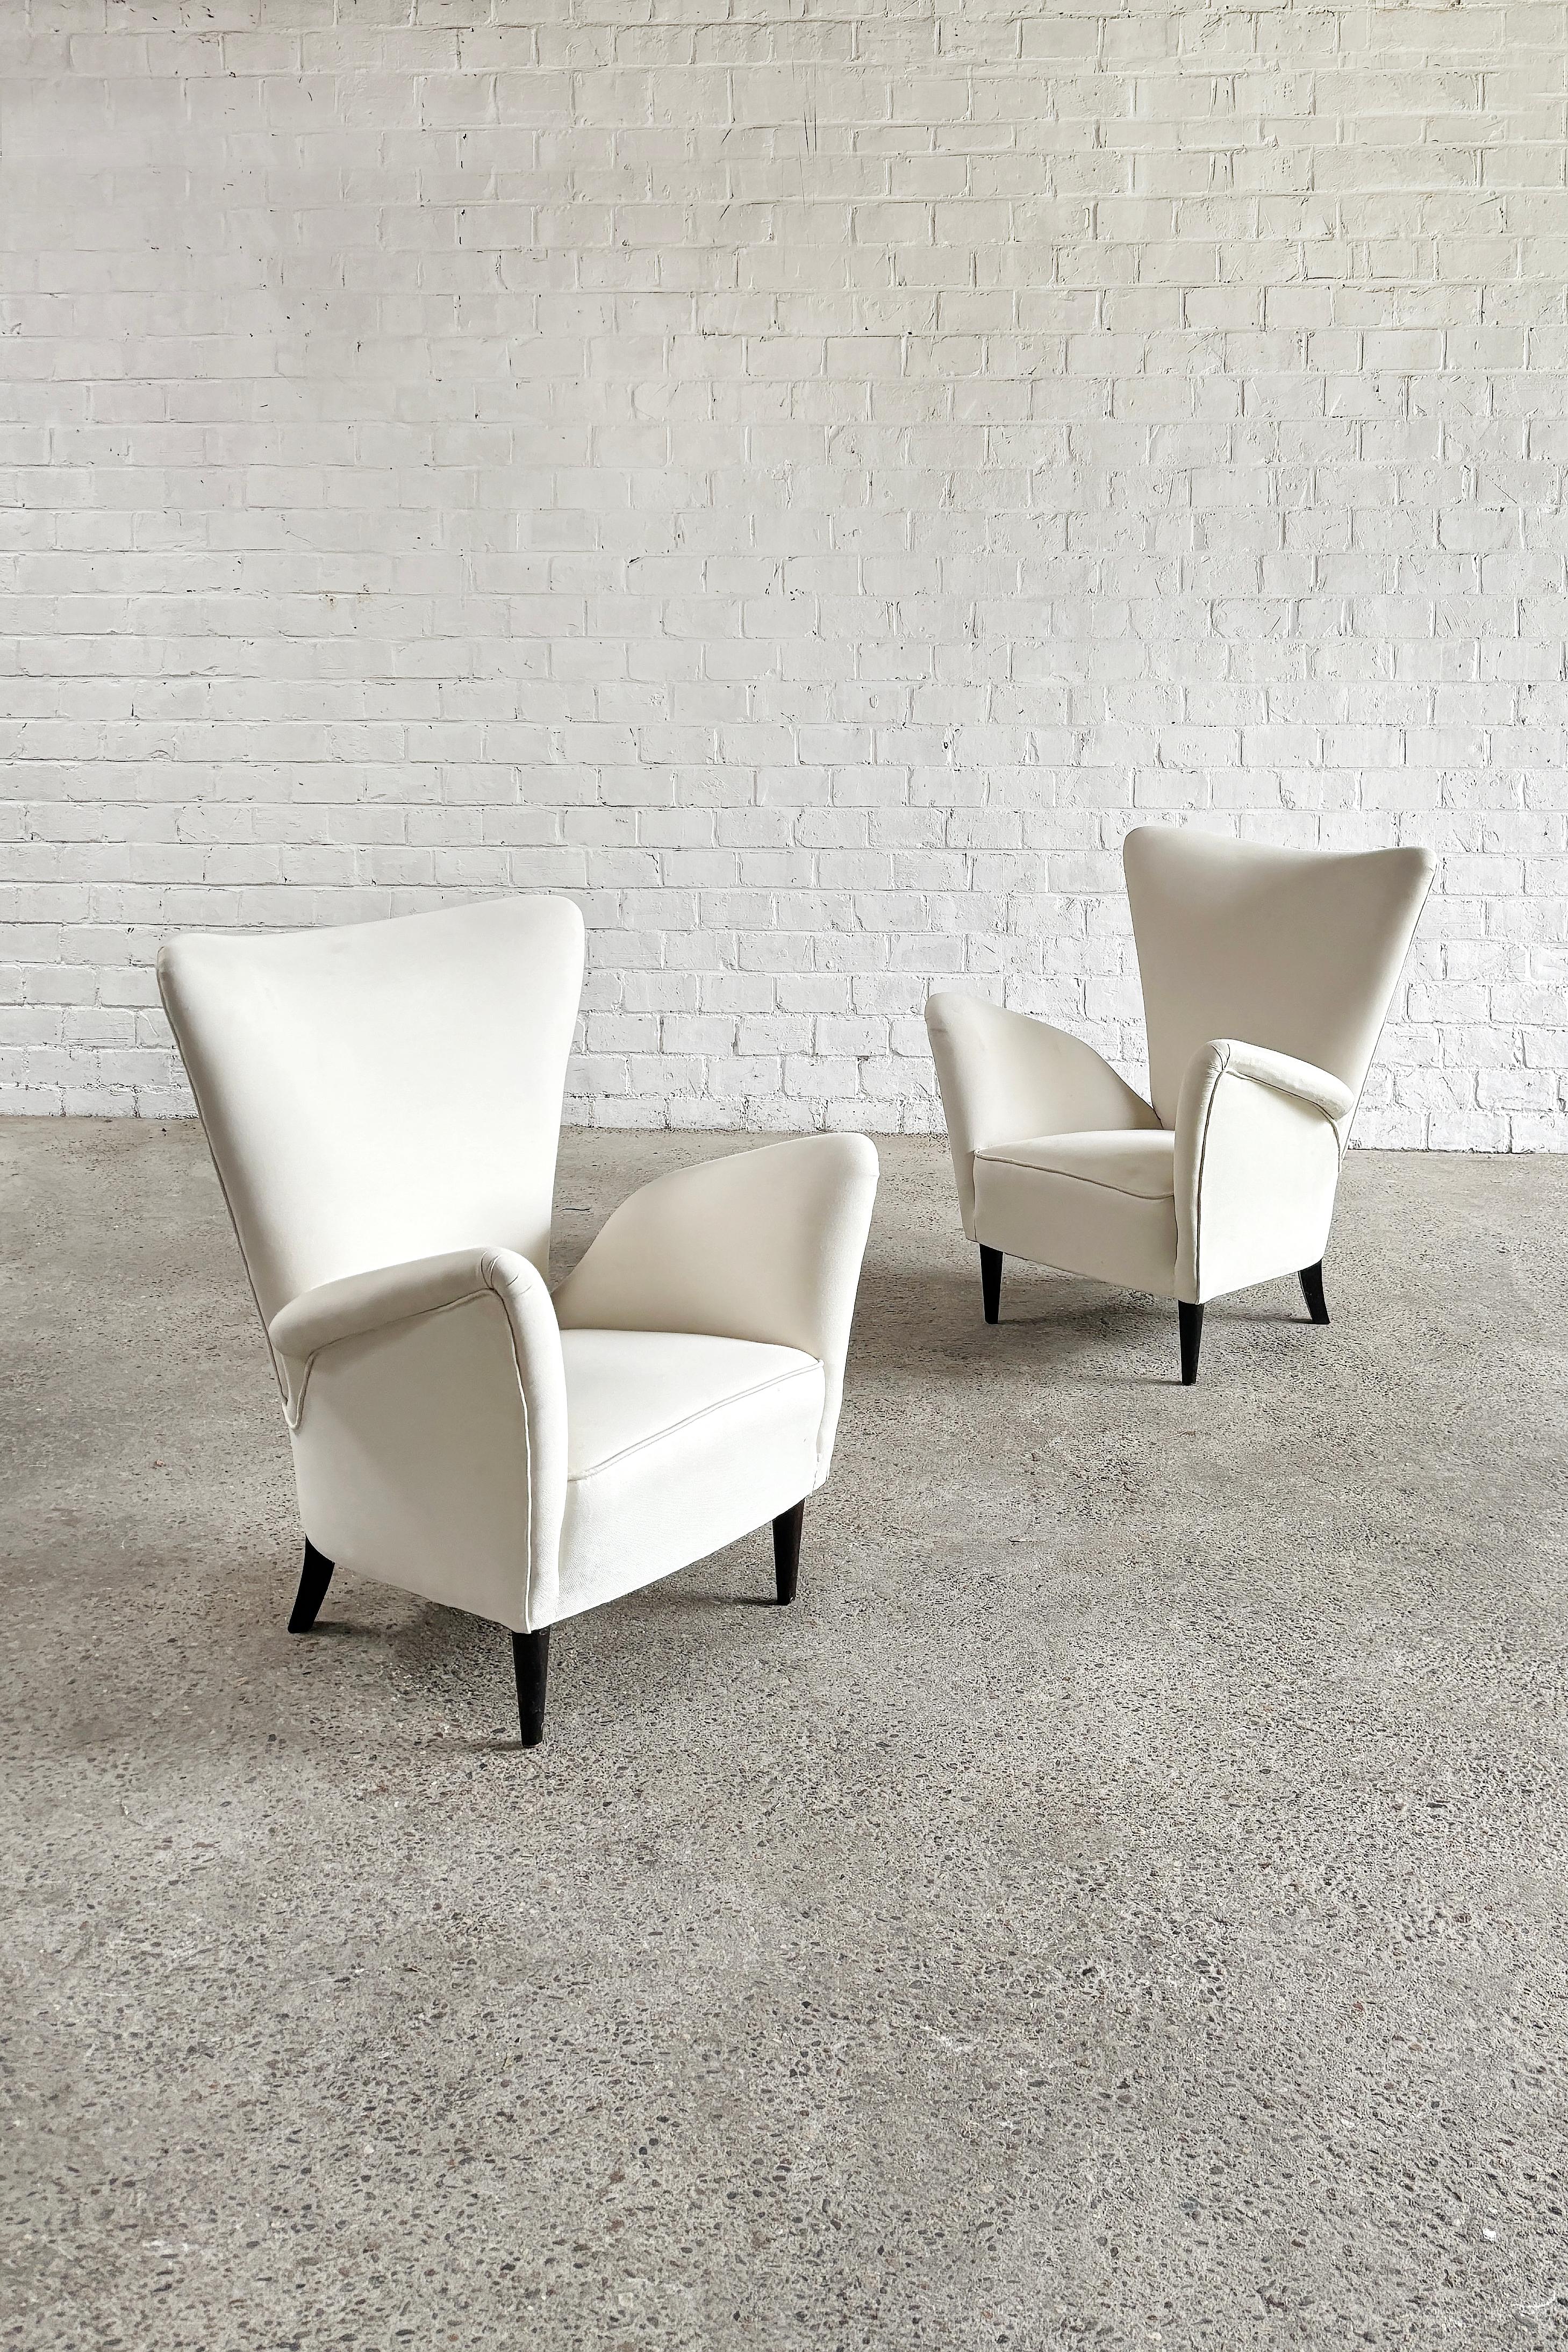 Italian Armchairs By Gio Ponti For Hotel Bristol Merano, 1950's For Sale 2